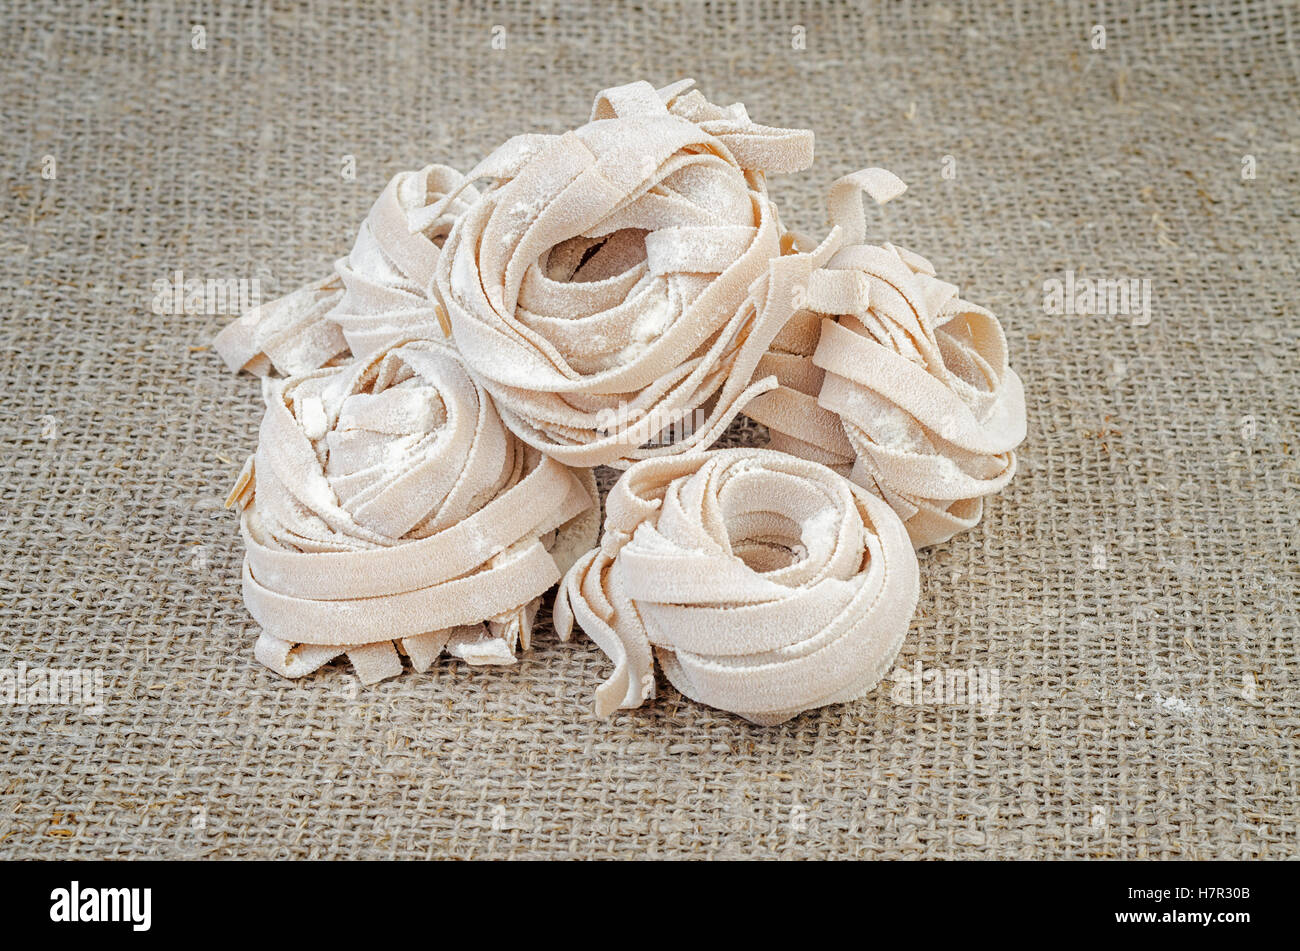 Uncooked homemade rolled traditional italian pasta on linen background. Portion of raw fettuccine or tagliatelle or pappardelle. Stock Photo